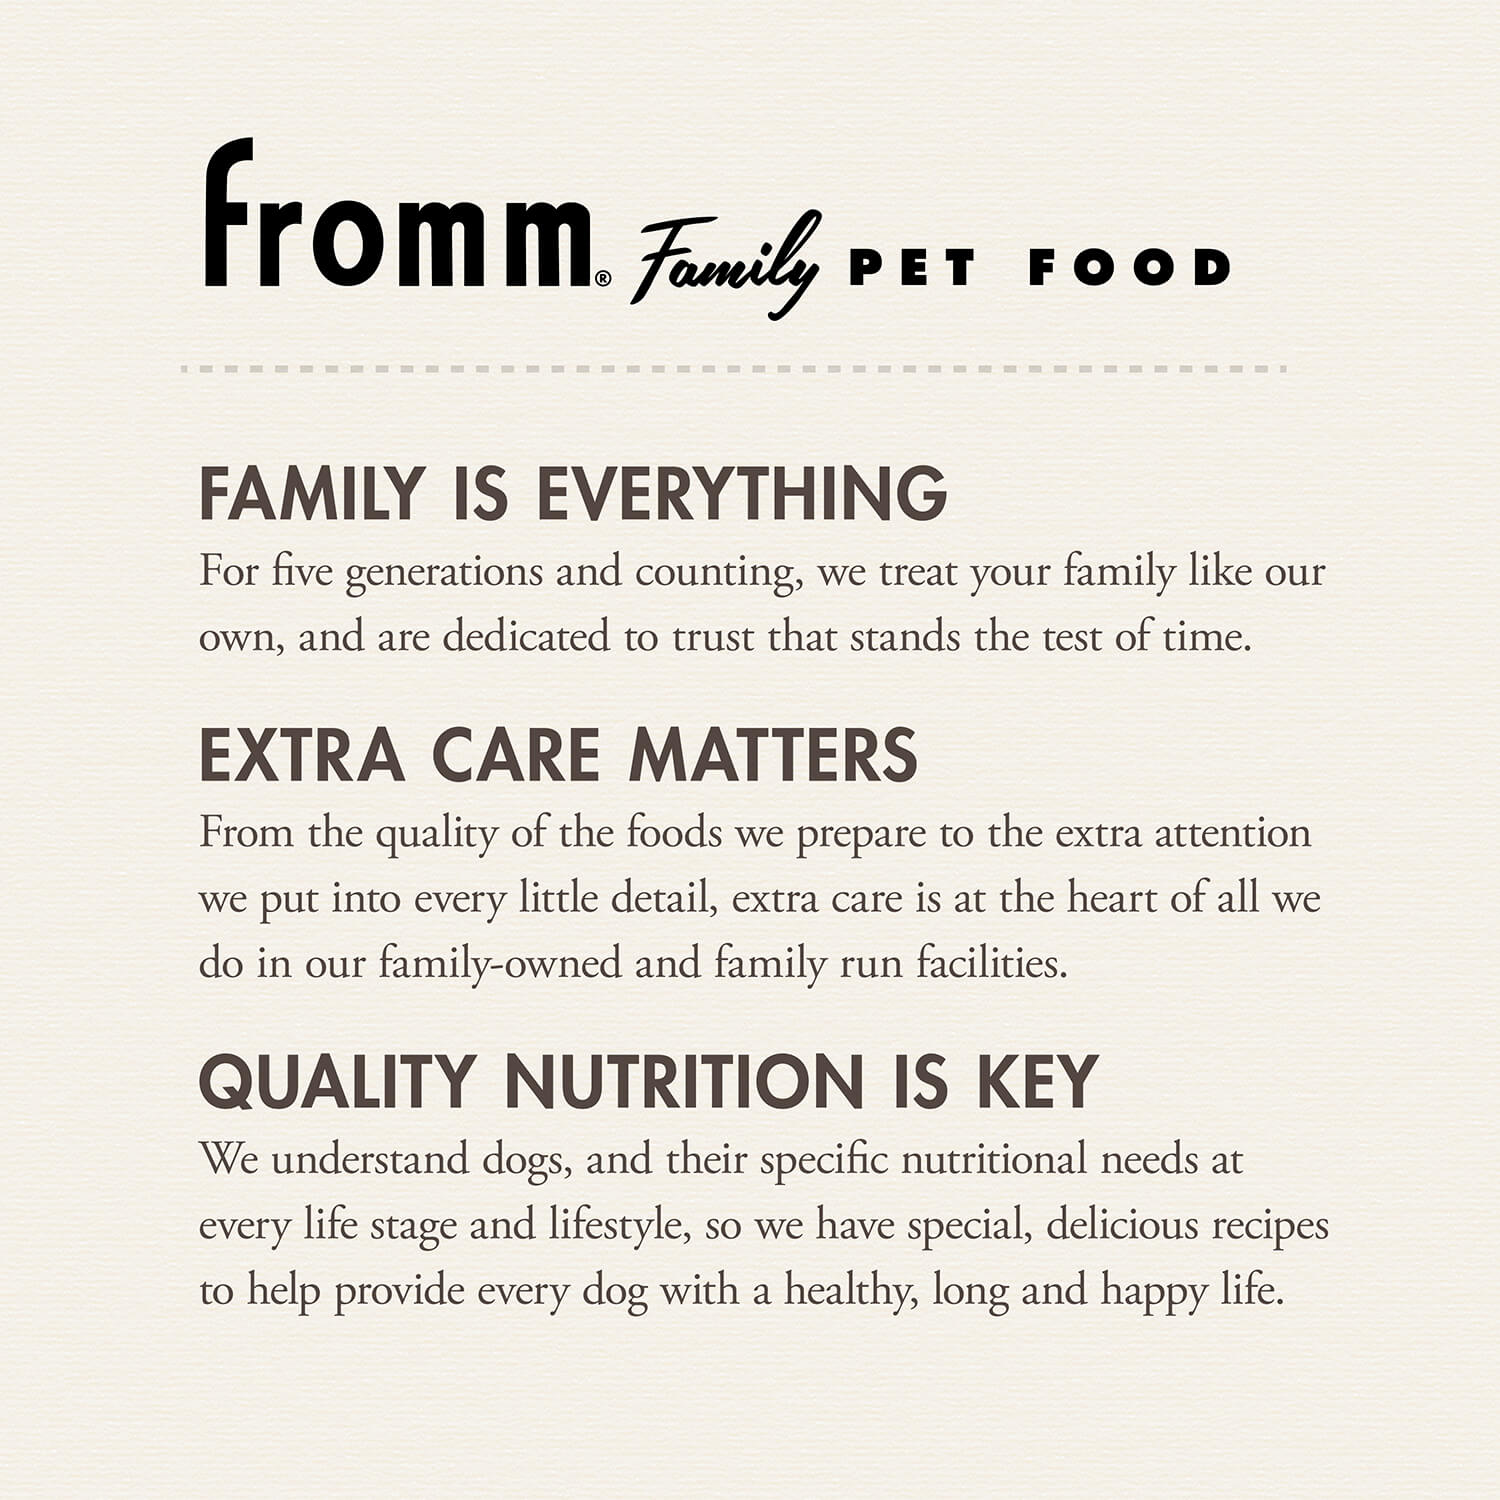 Fromm Gold | Dry Dog Food